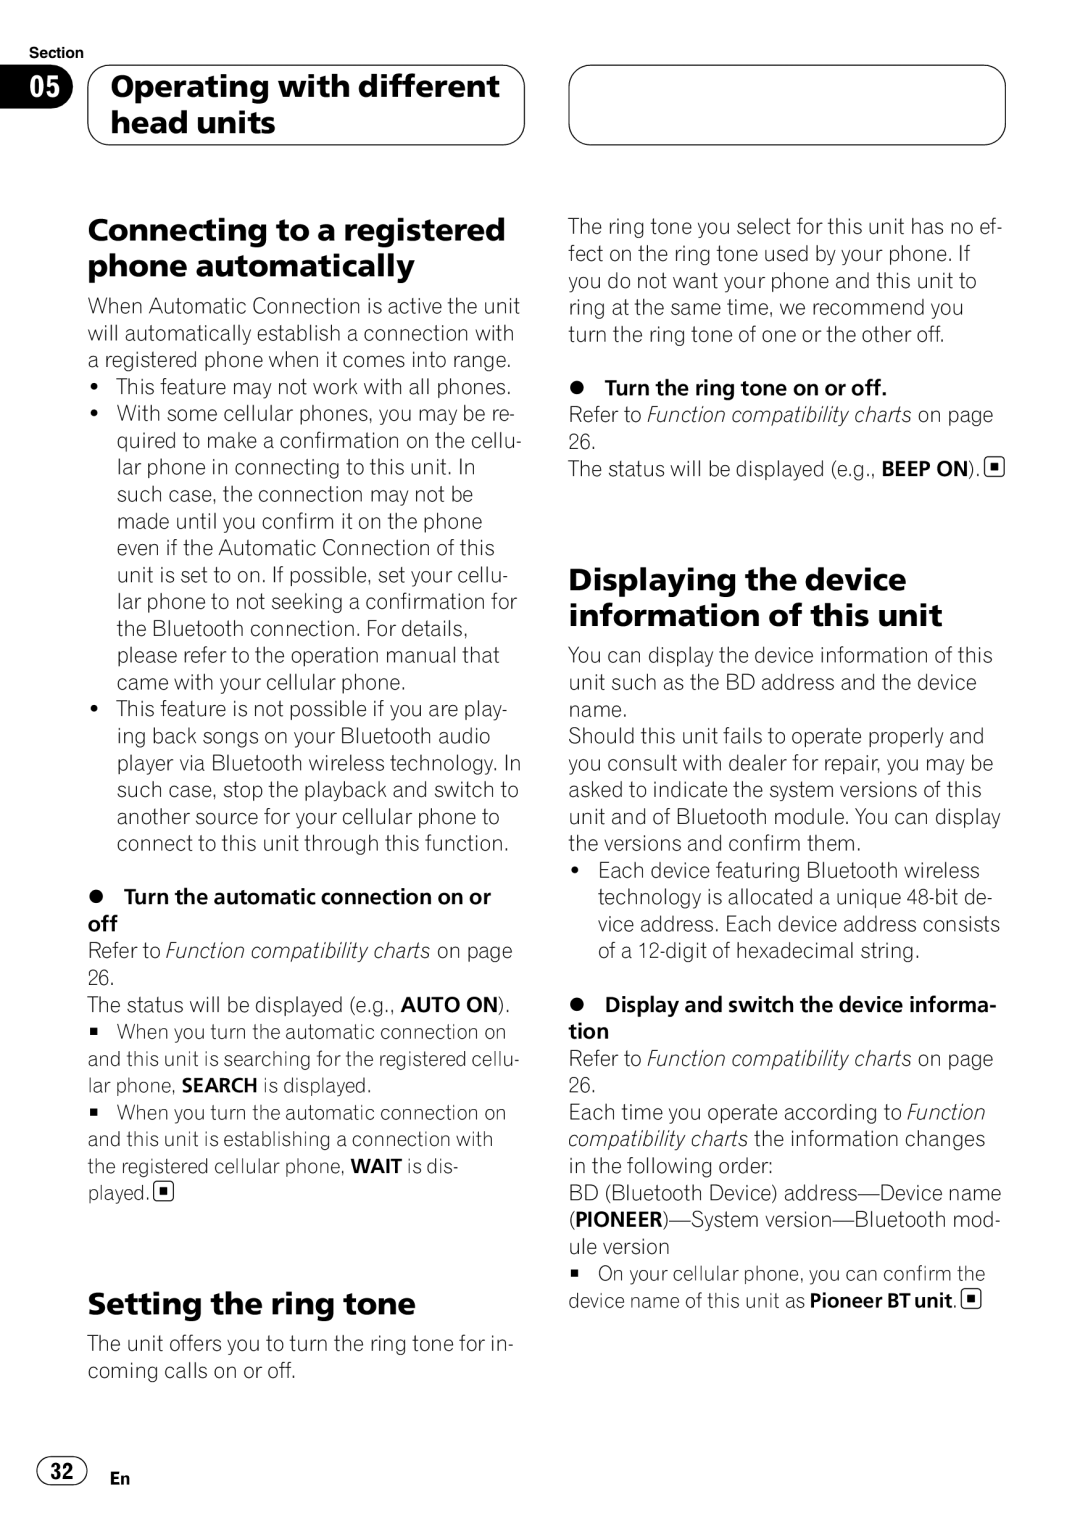 Pioneer CD-BTB200 owner manual Connecting to a registered phone automatically, Setting the ring tone, 32 En 